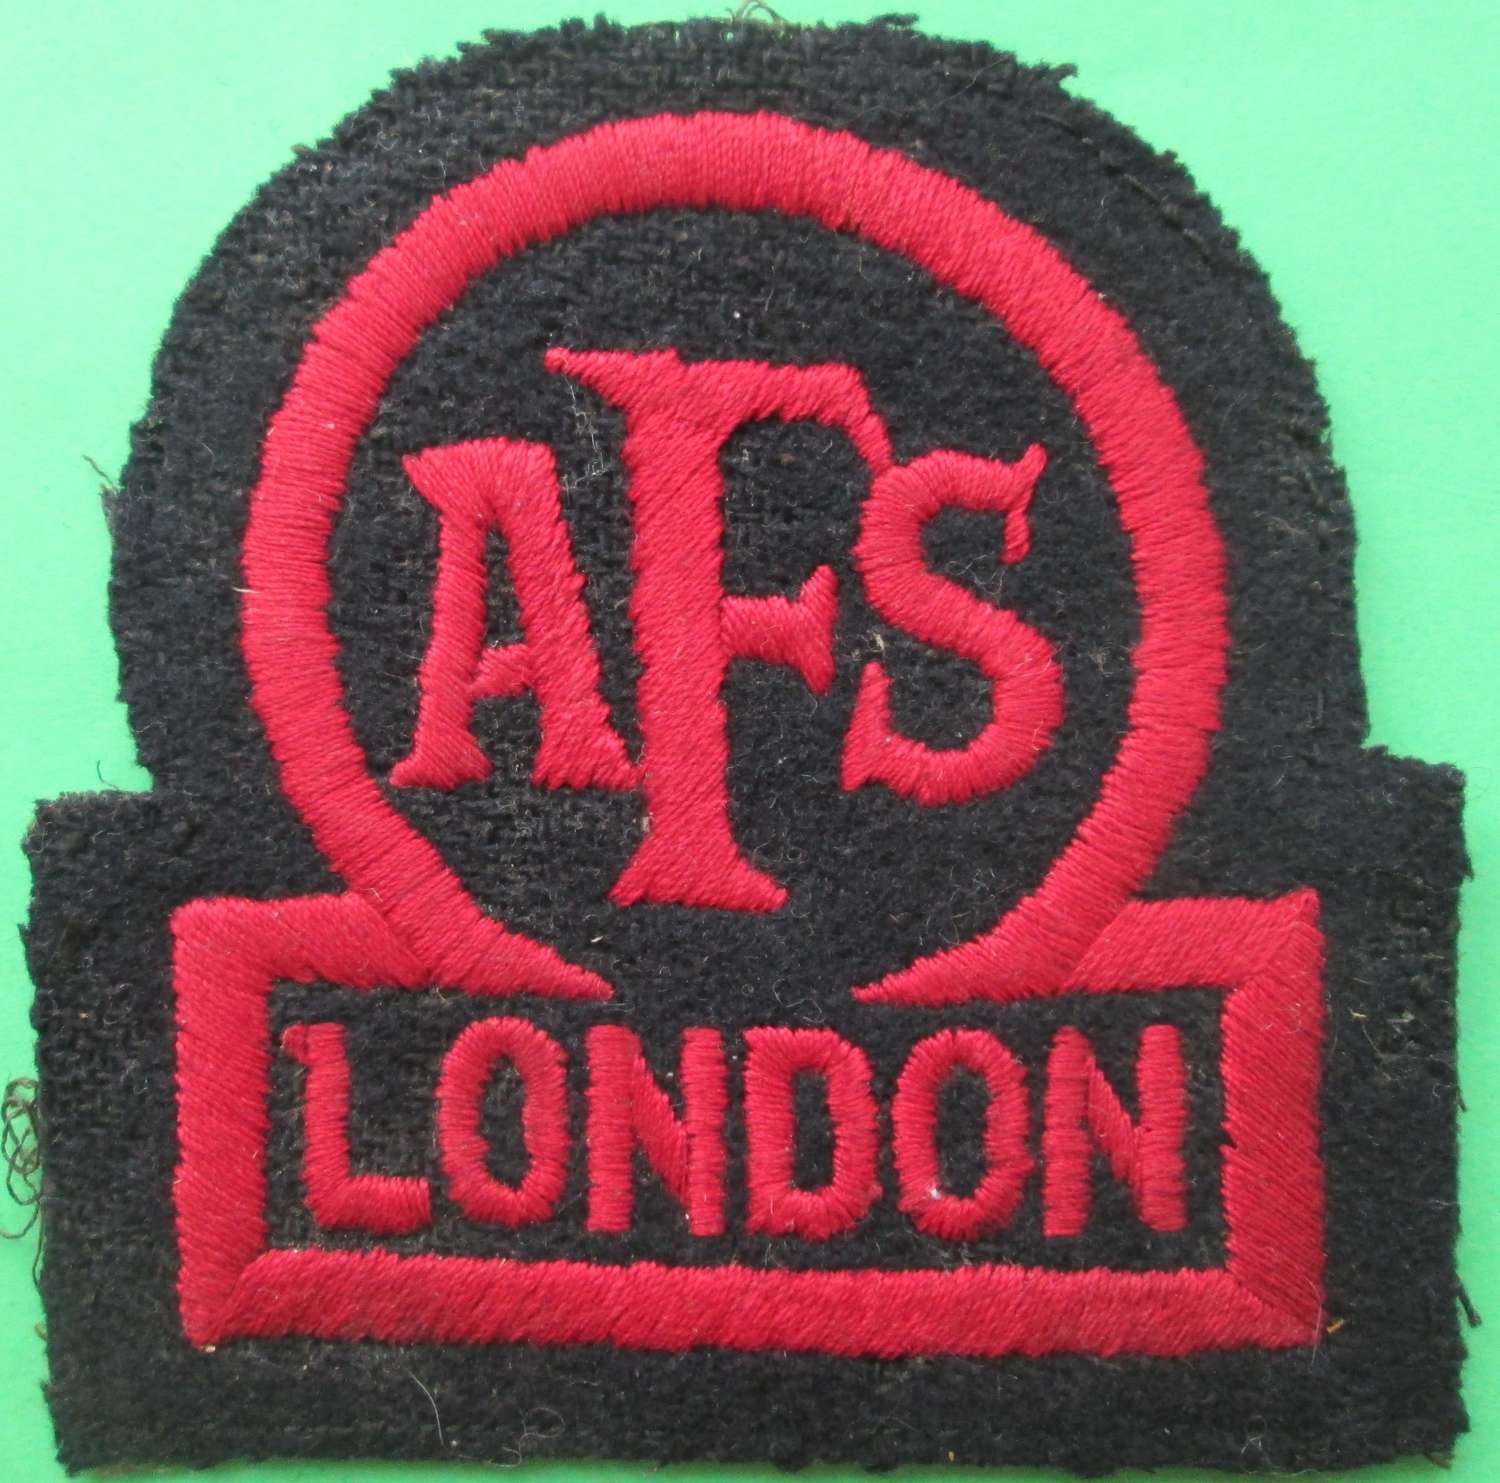 AN AUXILLARY FIRE SERVICE BADGE FOR LONDON